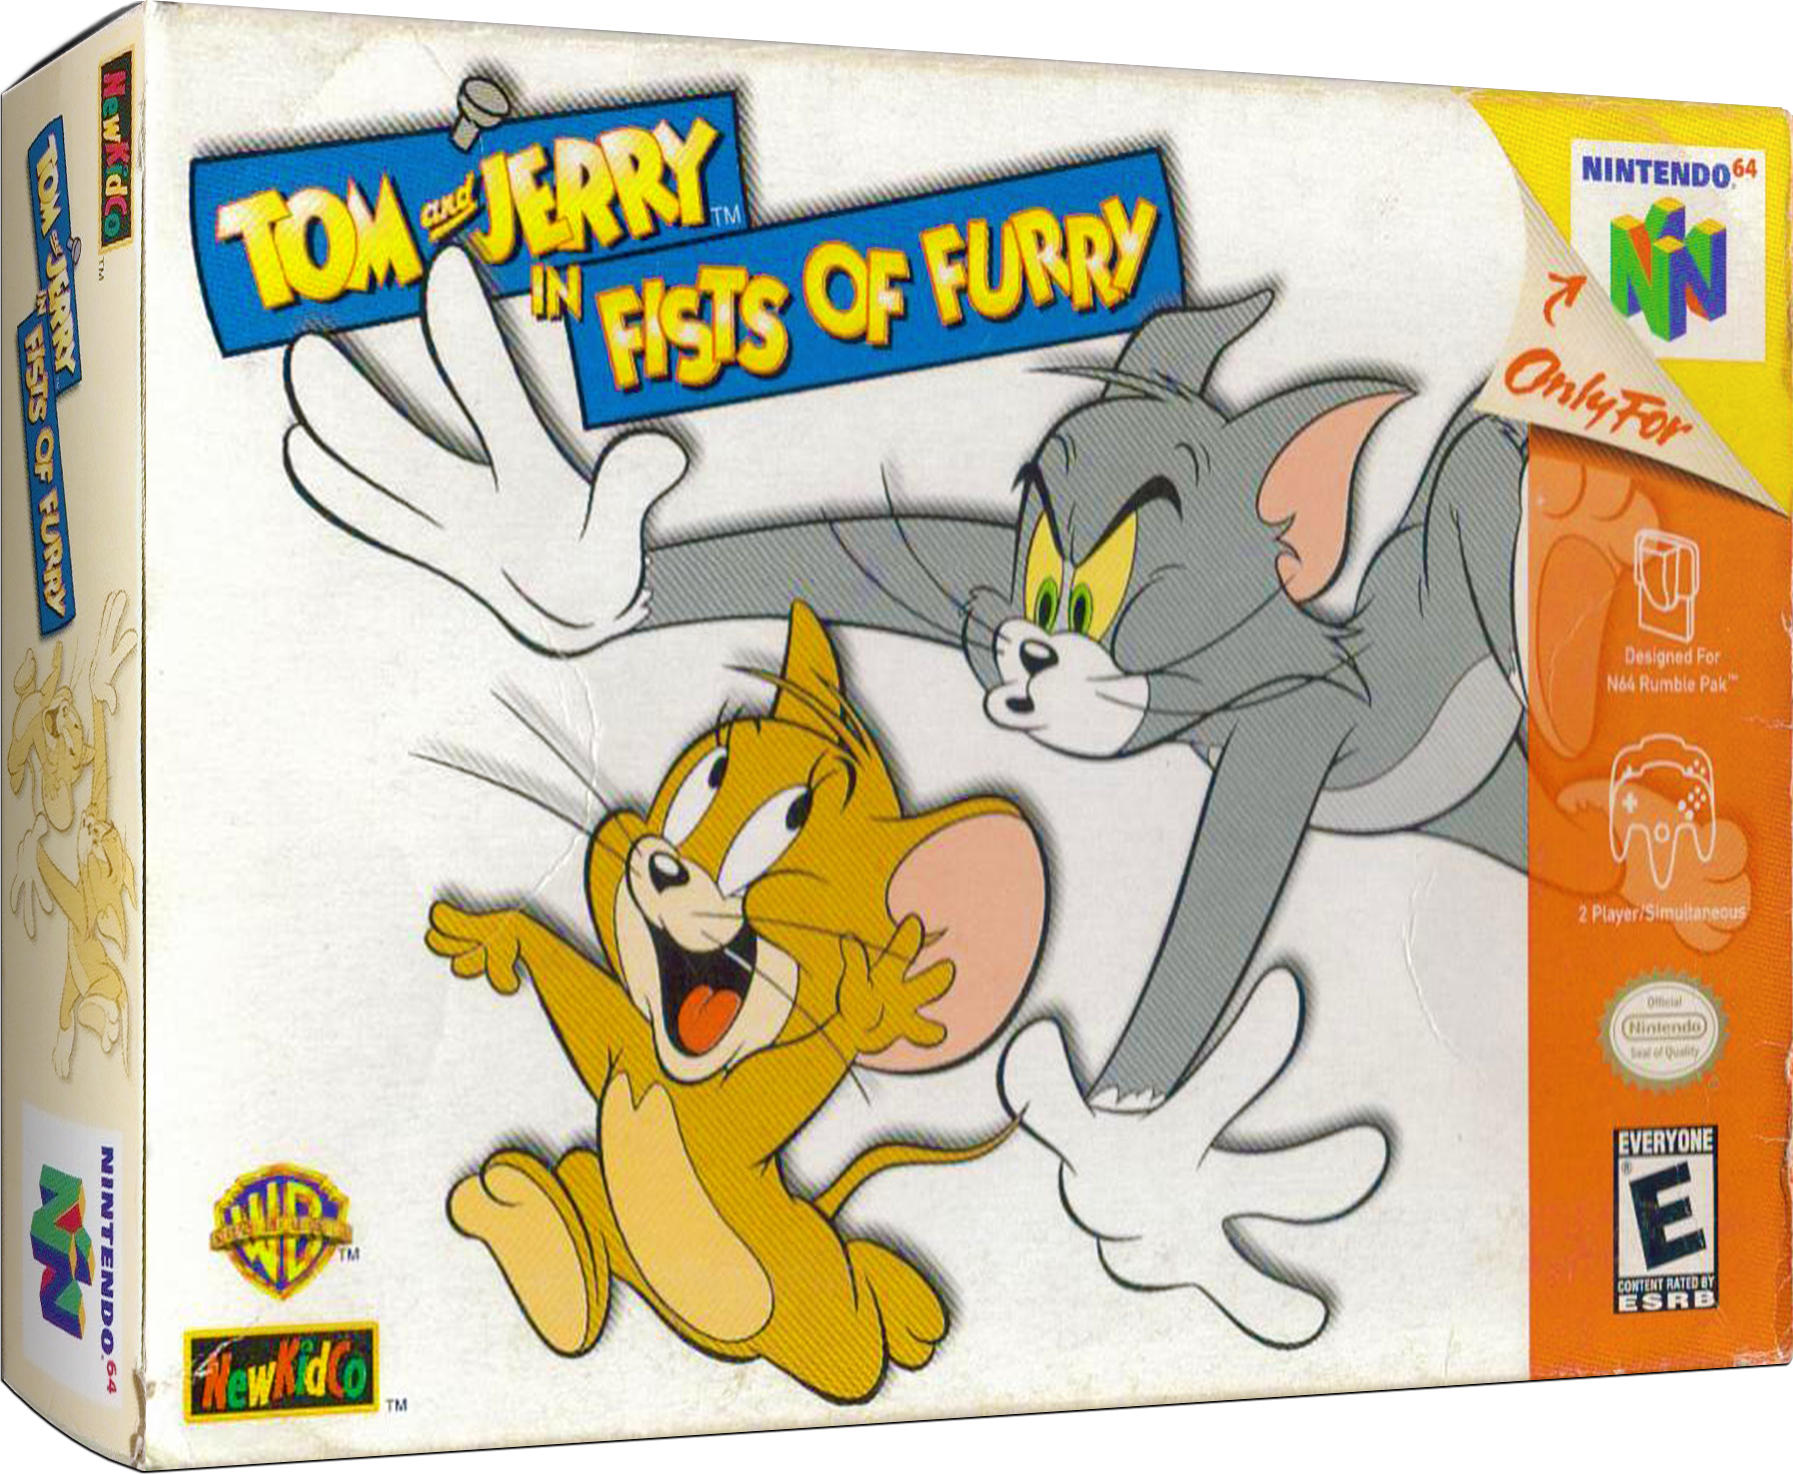 tom and jerry in fists of fury